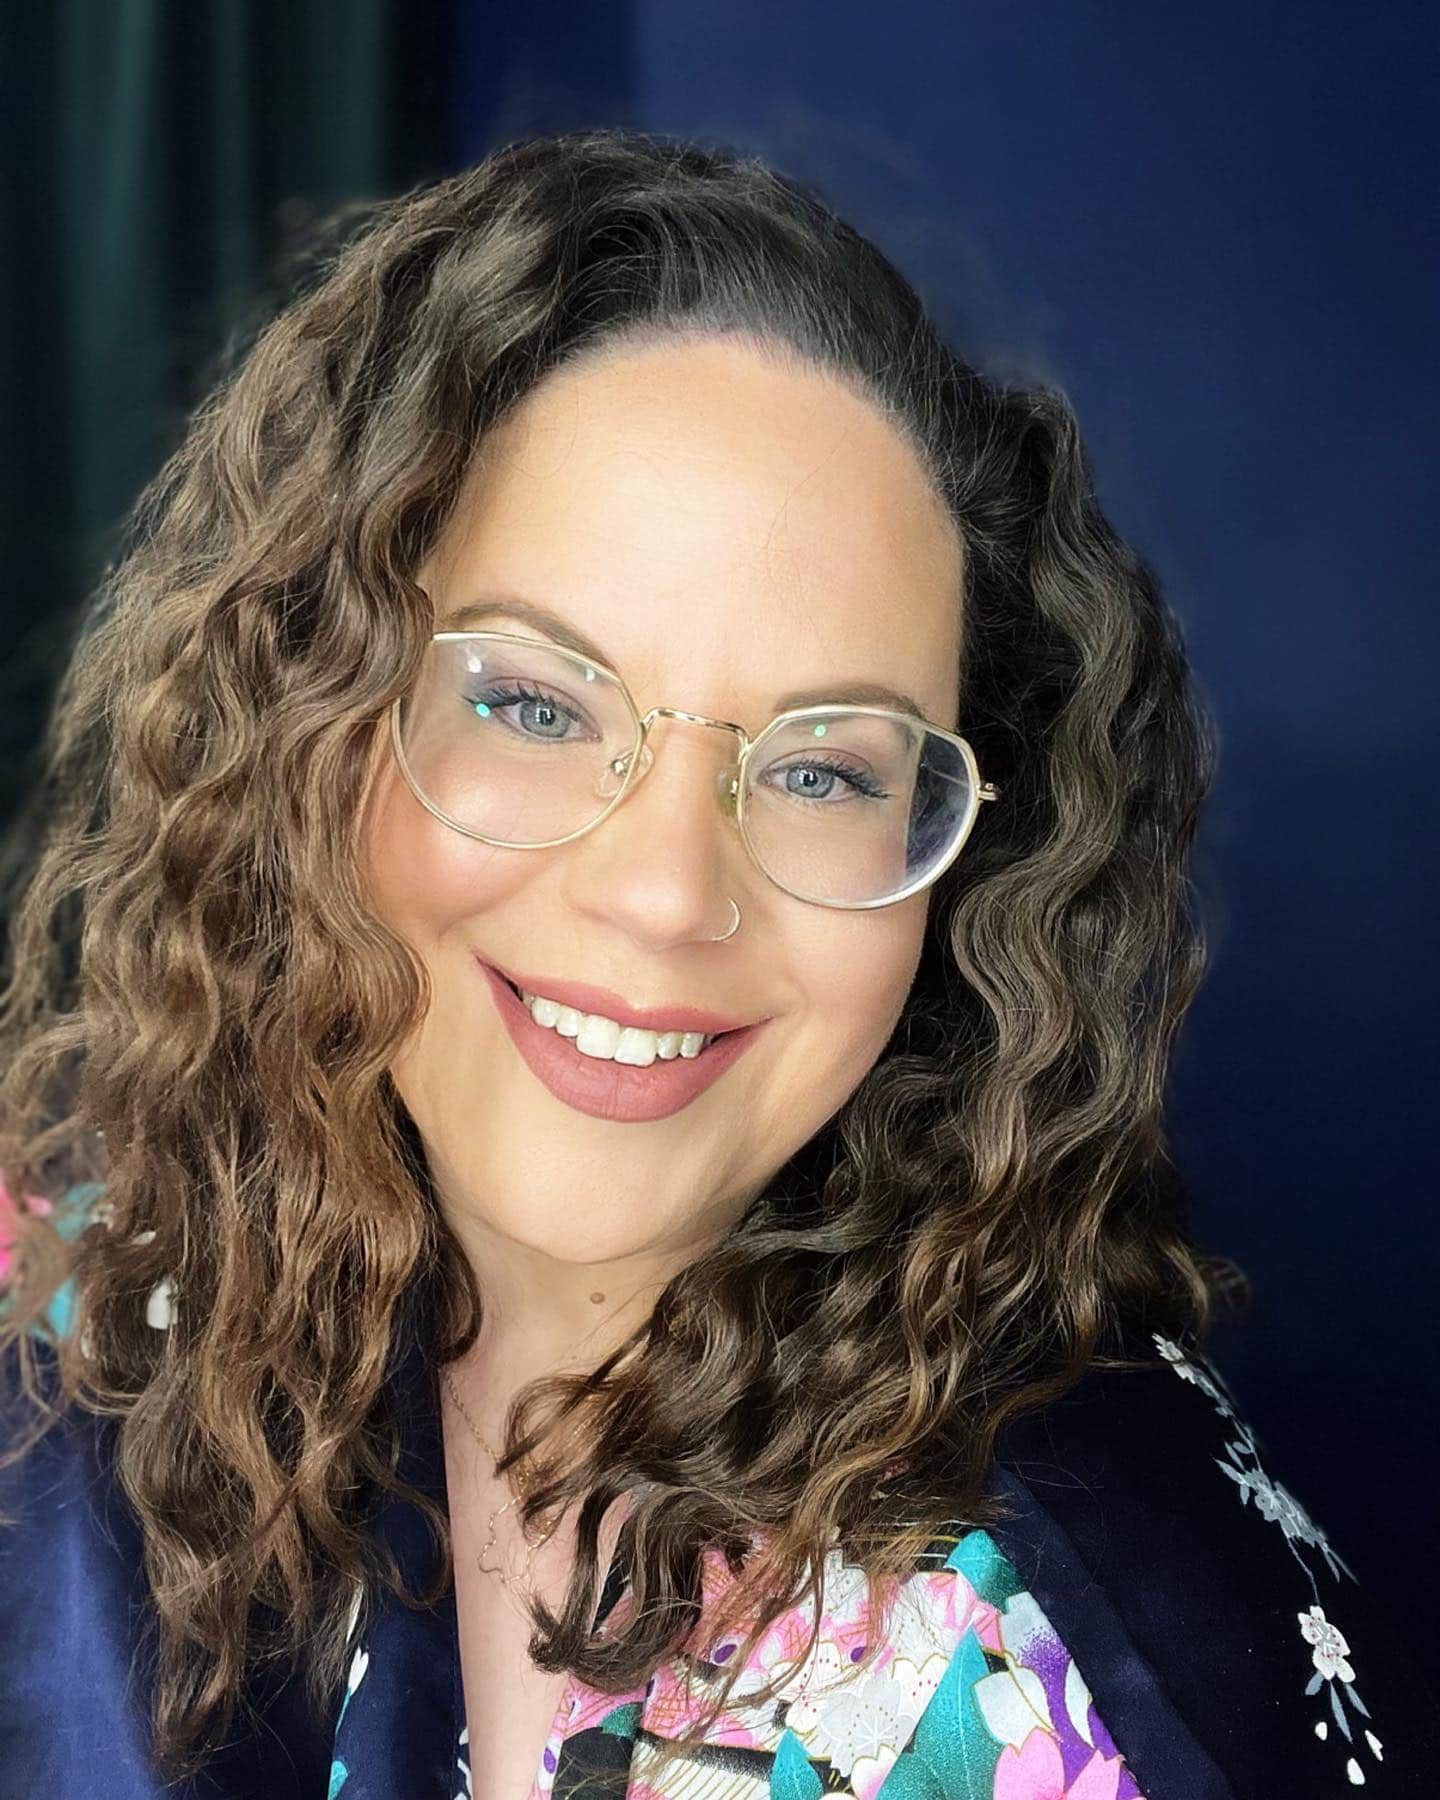 A woman with curly hair and glasses